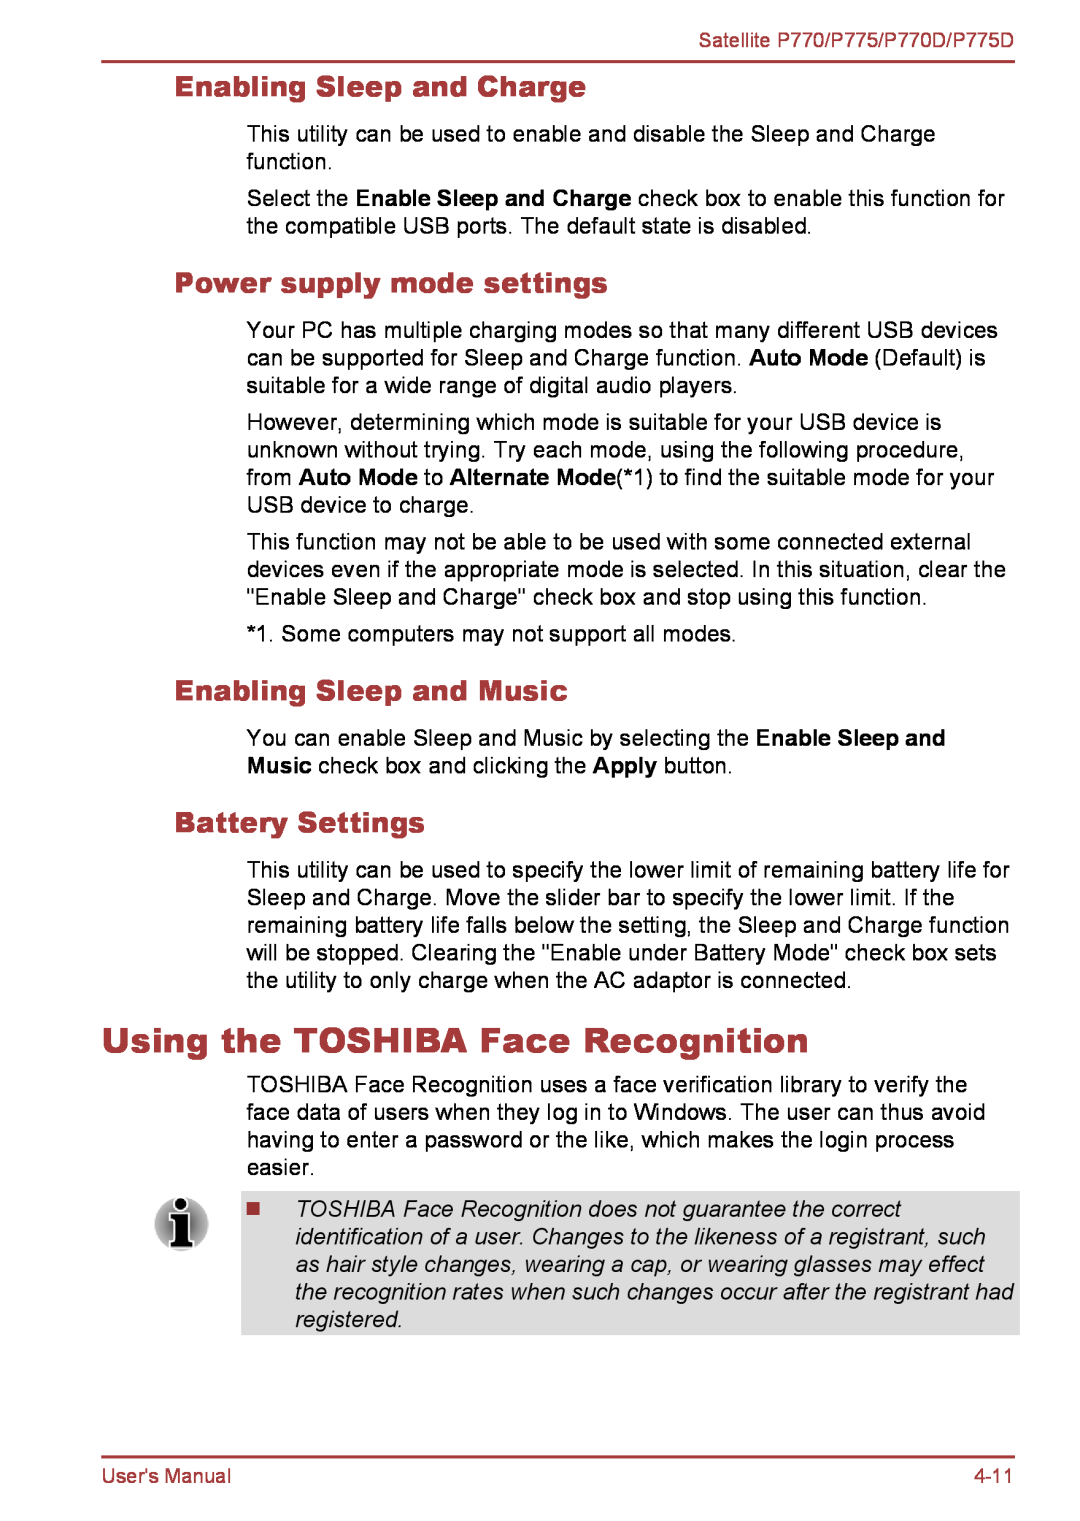 Toshiba P770 Using the TOSHIBA Face Recognition, Enabling Sleep and Charge, Power supply mode settings, Battery Settings 